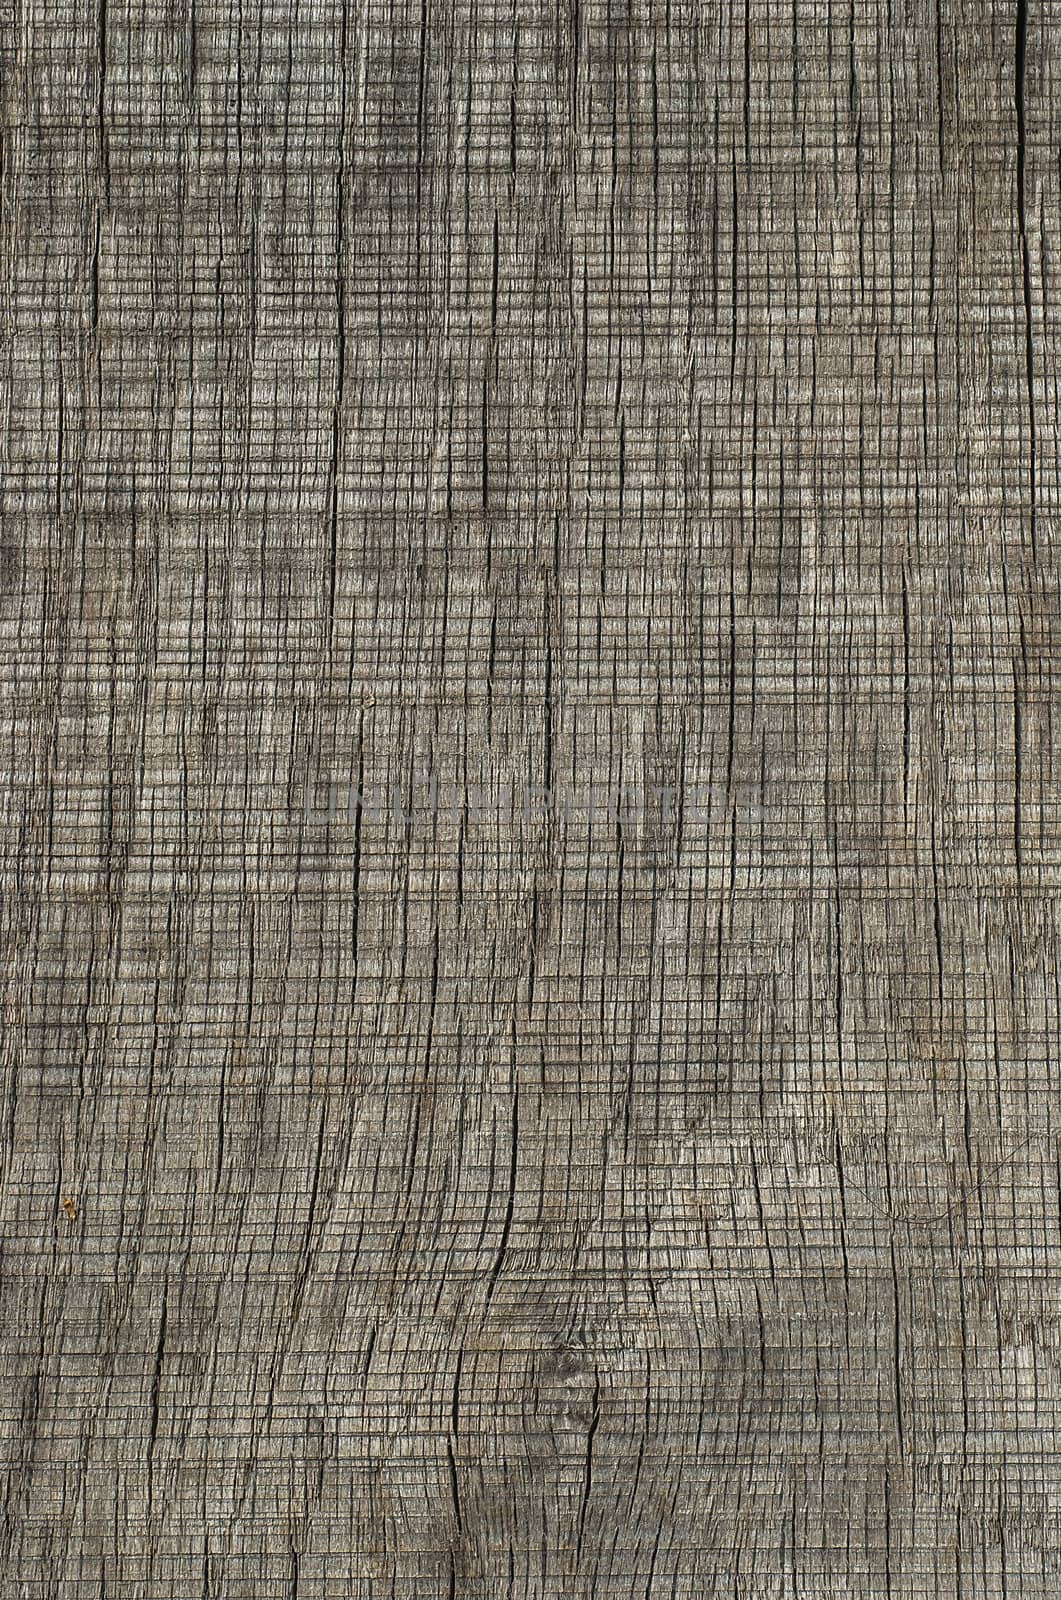 Old weathered textured wooden oak board as background